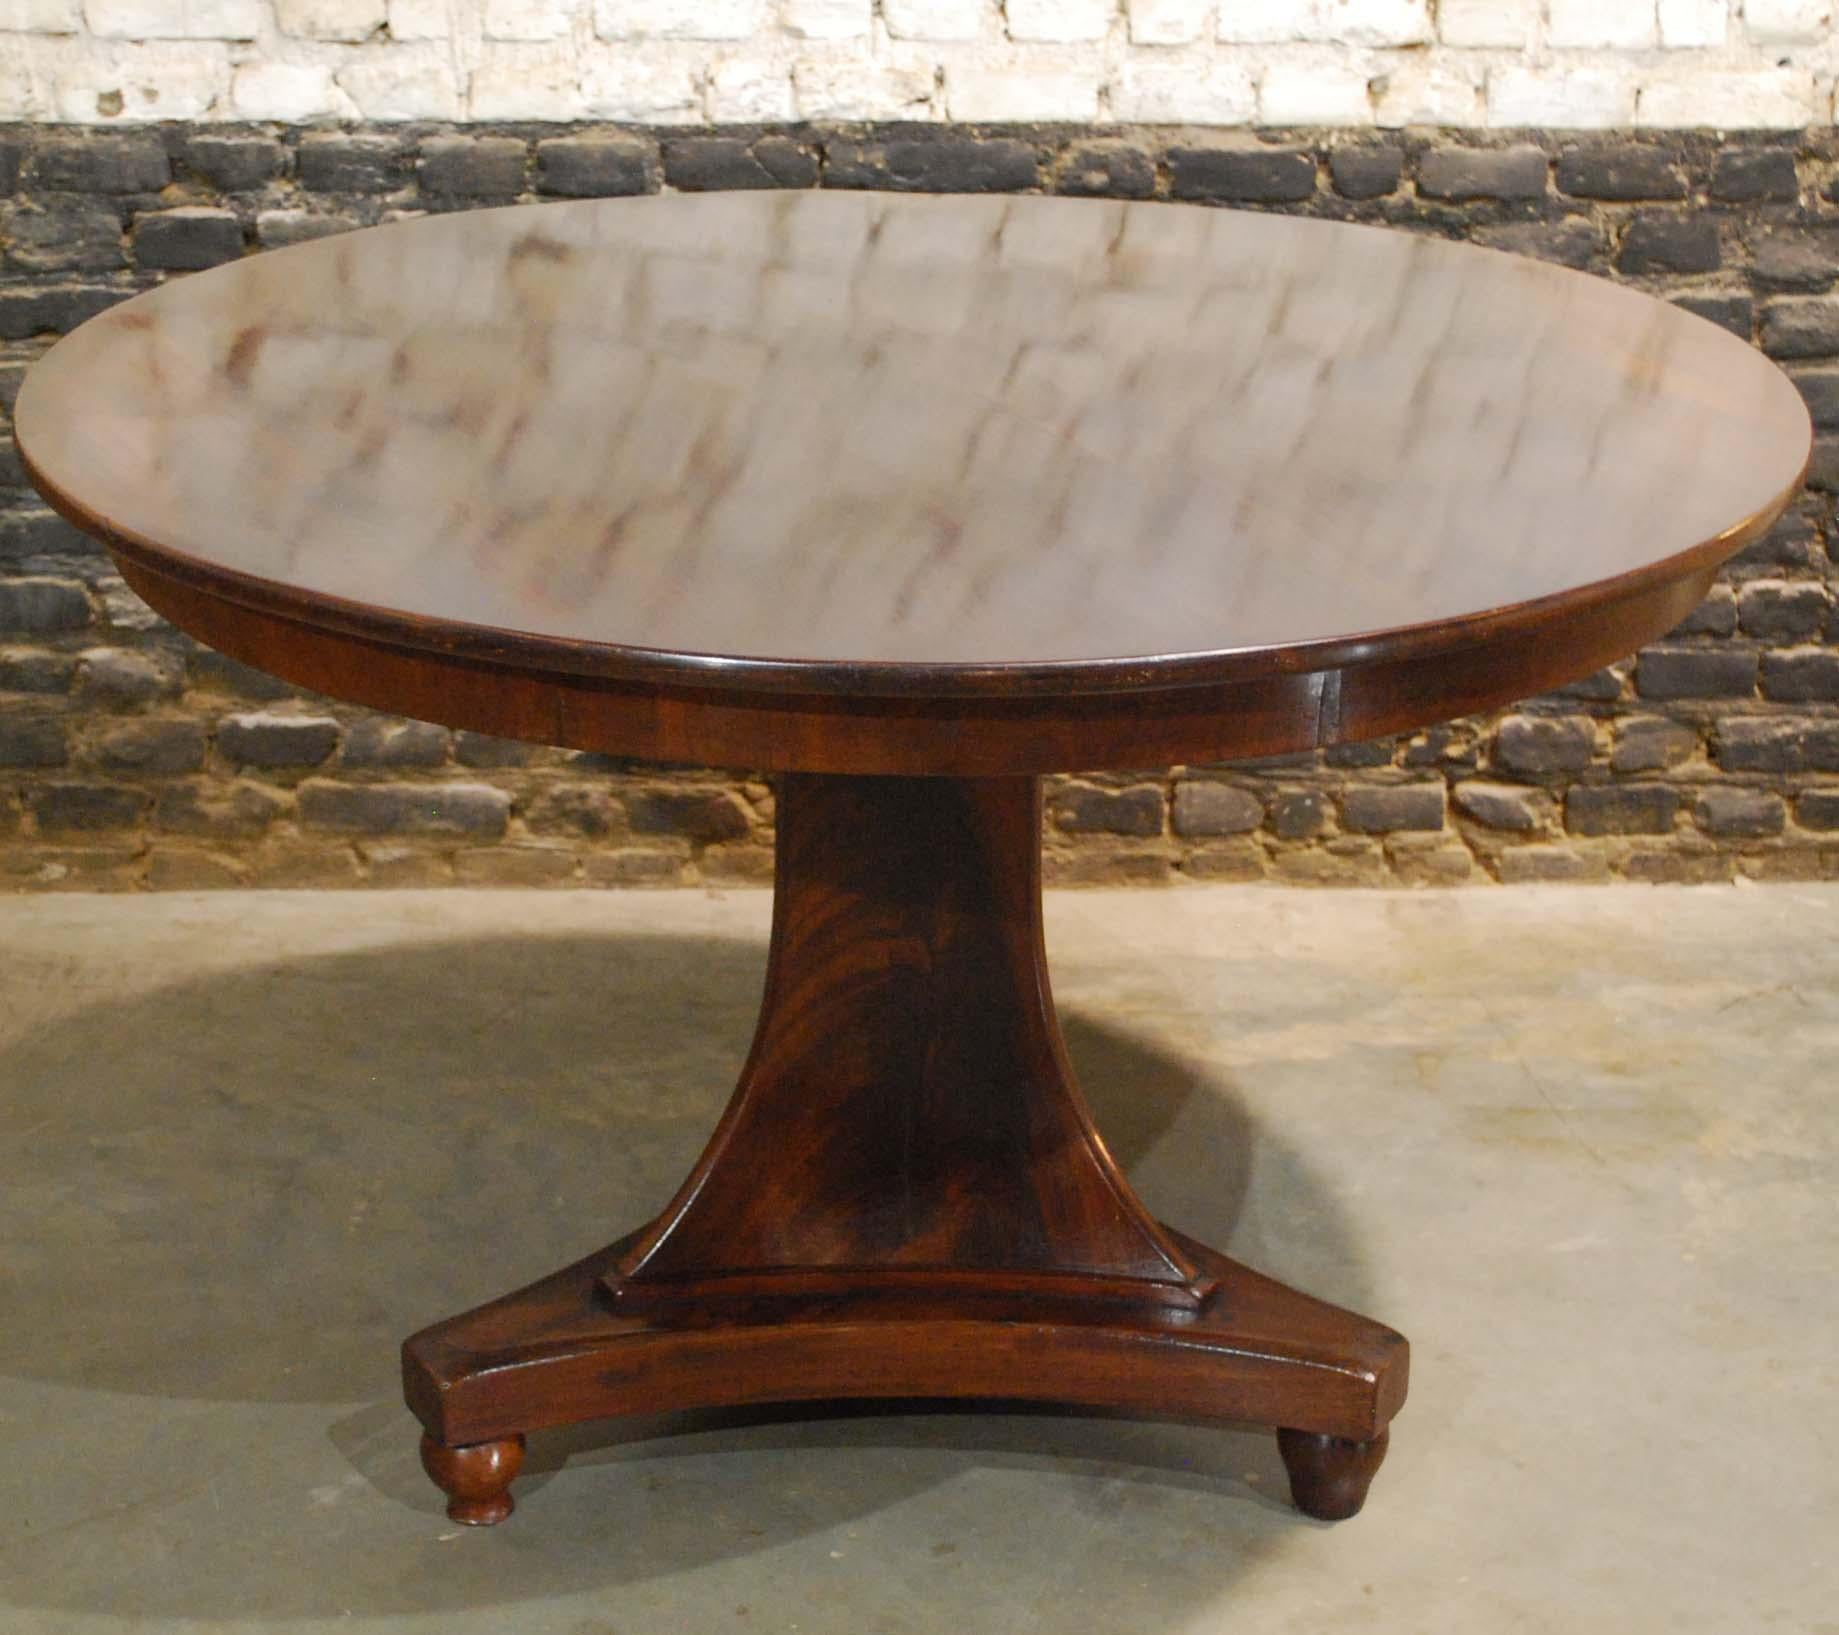 An elegant round mahogany dining table on a trefoil platform base that stands on bun feet. 
The tabletop is made in 0.8-inch thick solid mahogany in a “livre ouvert” style. It is made in two pieces of timber that fold open like a book and are